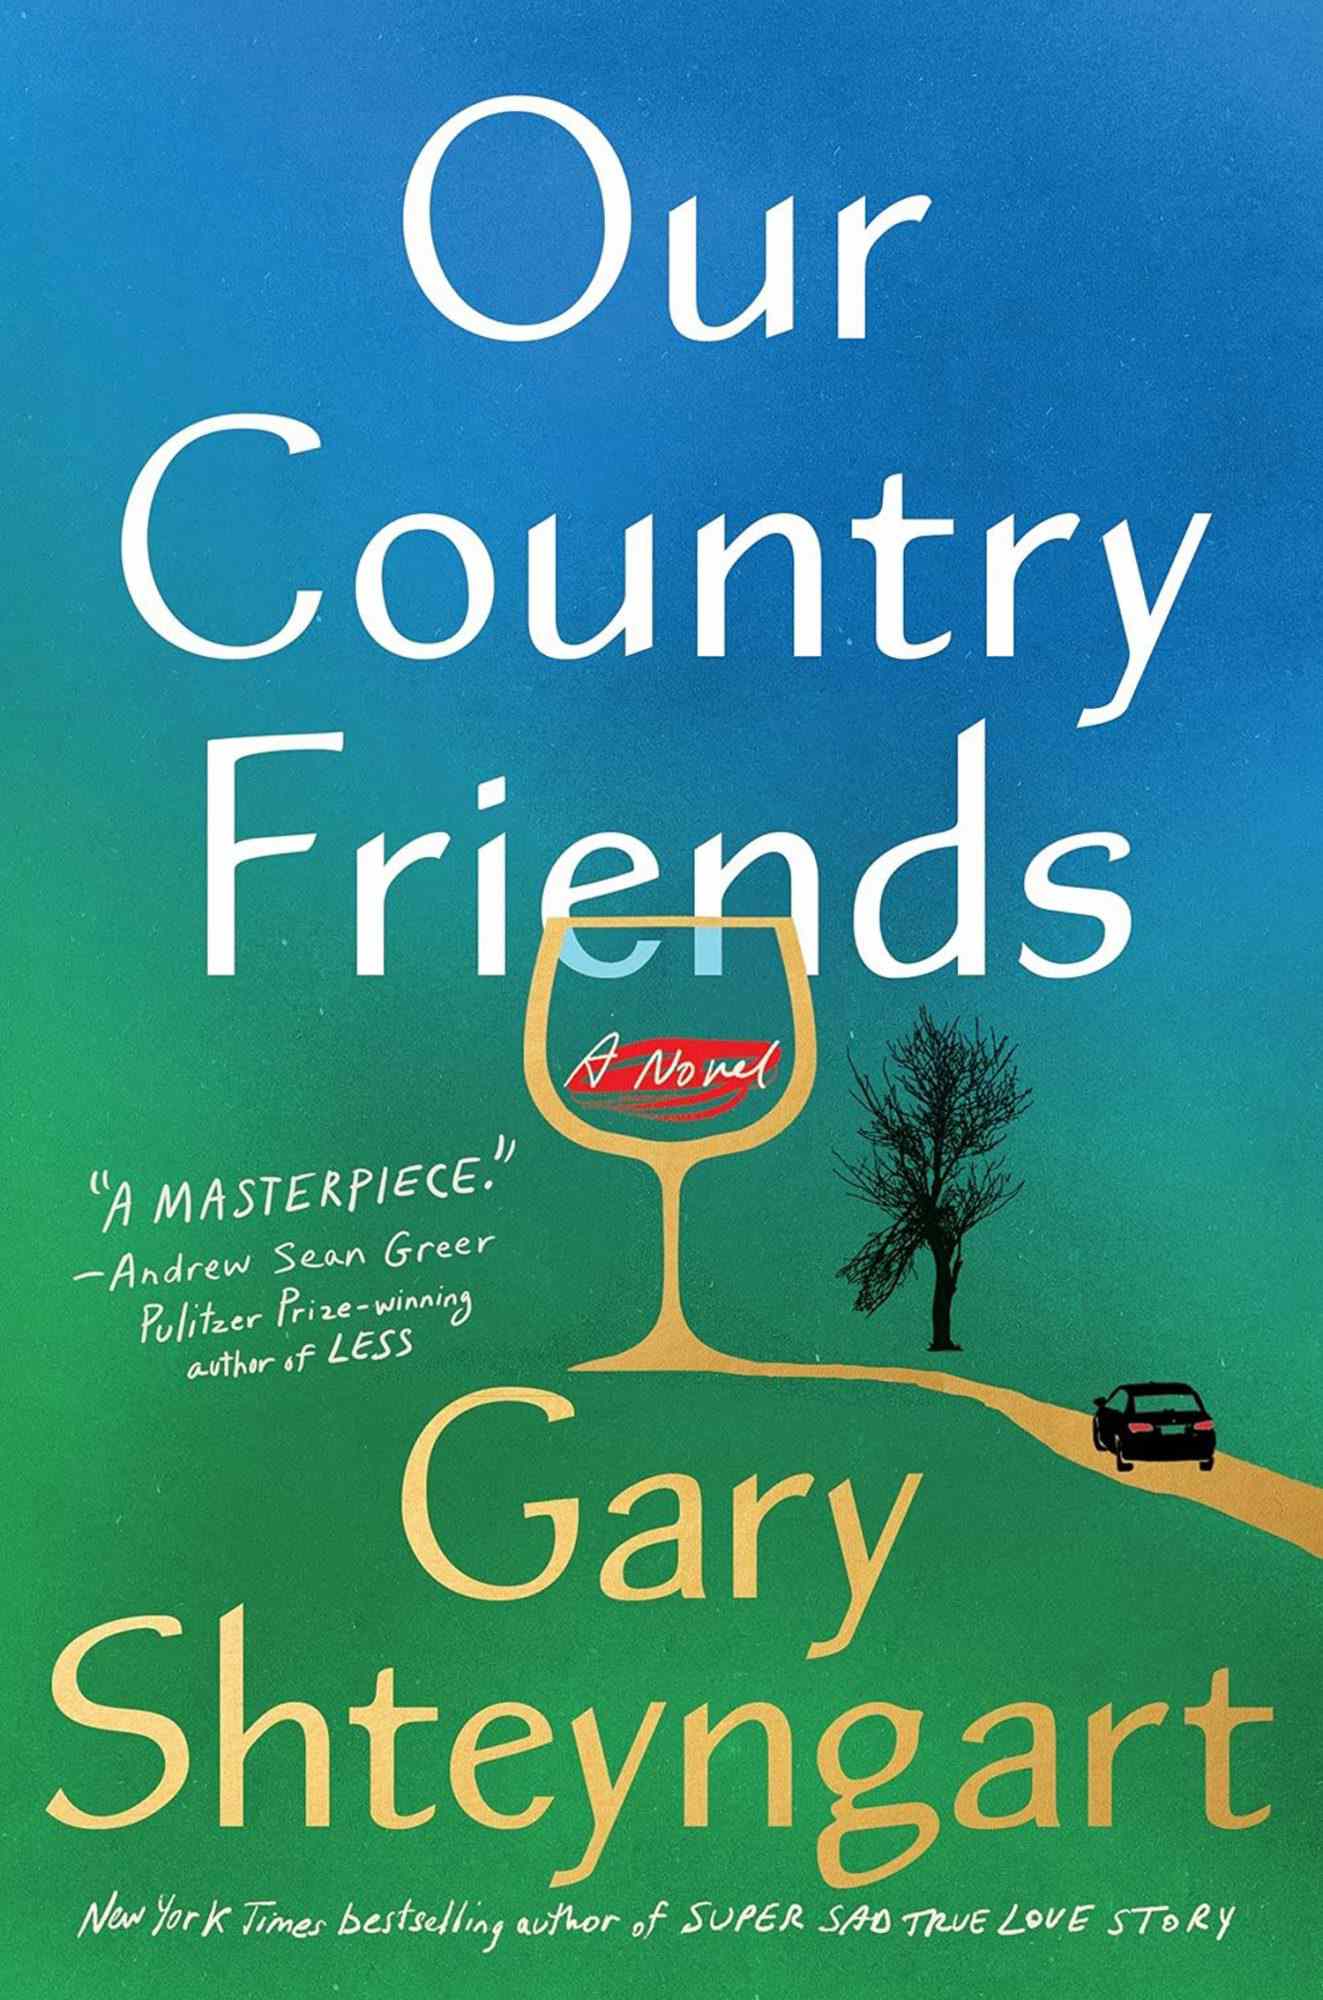 Our Country Friends, by Gary Shteyngart